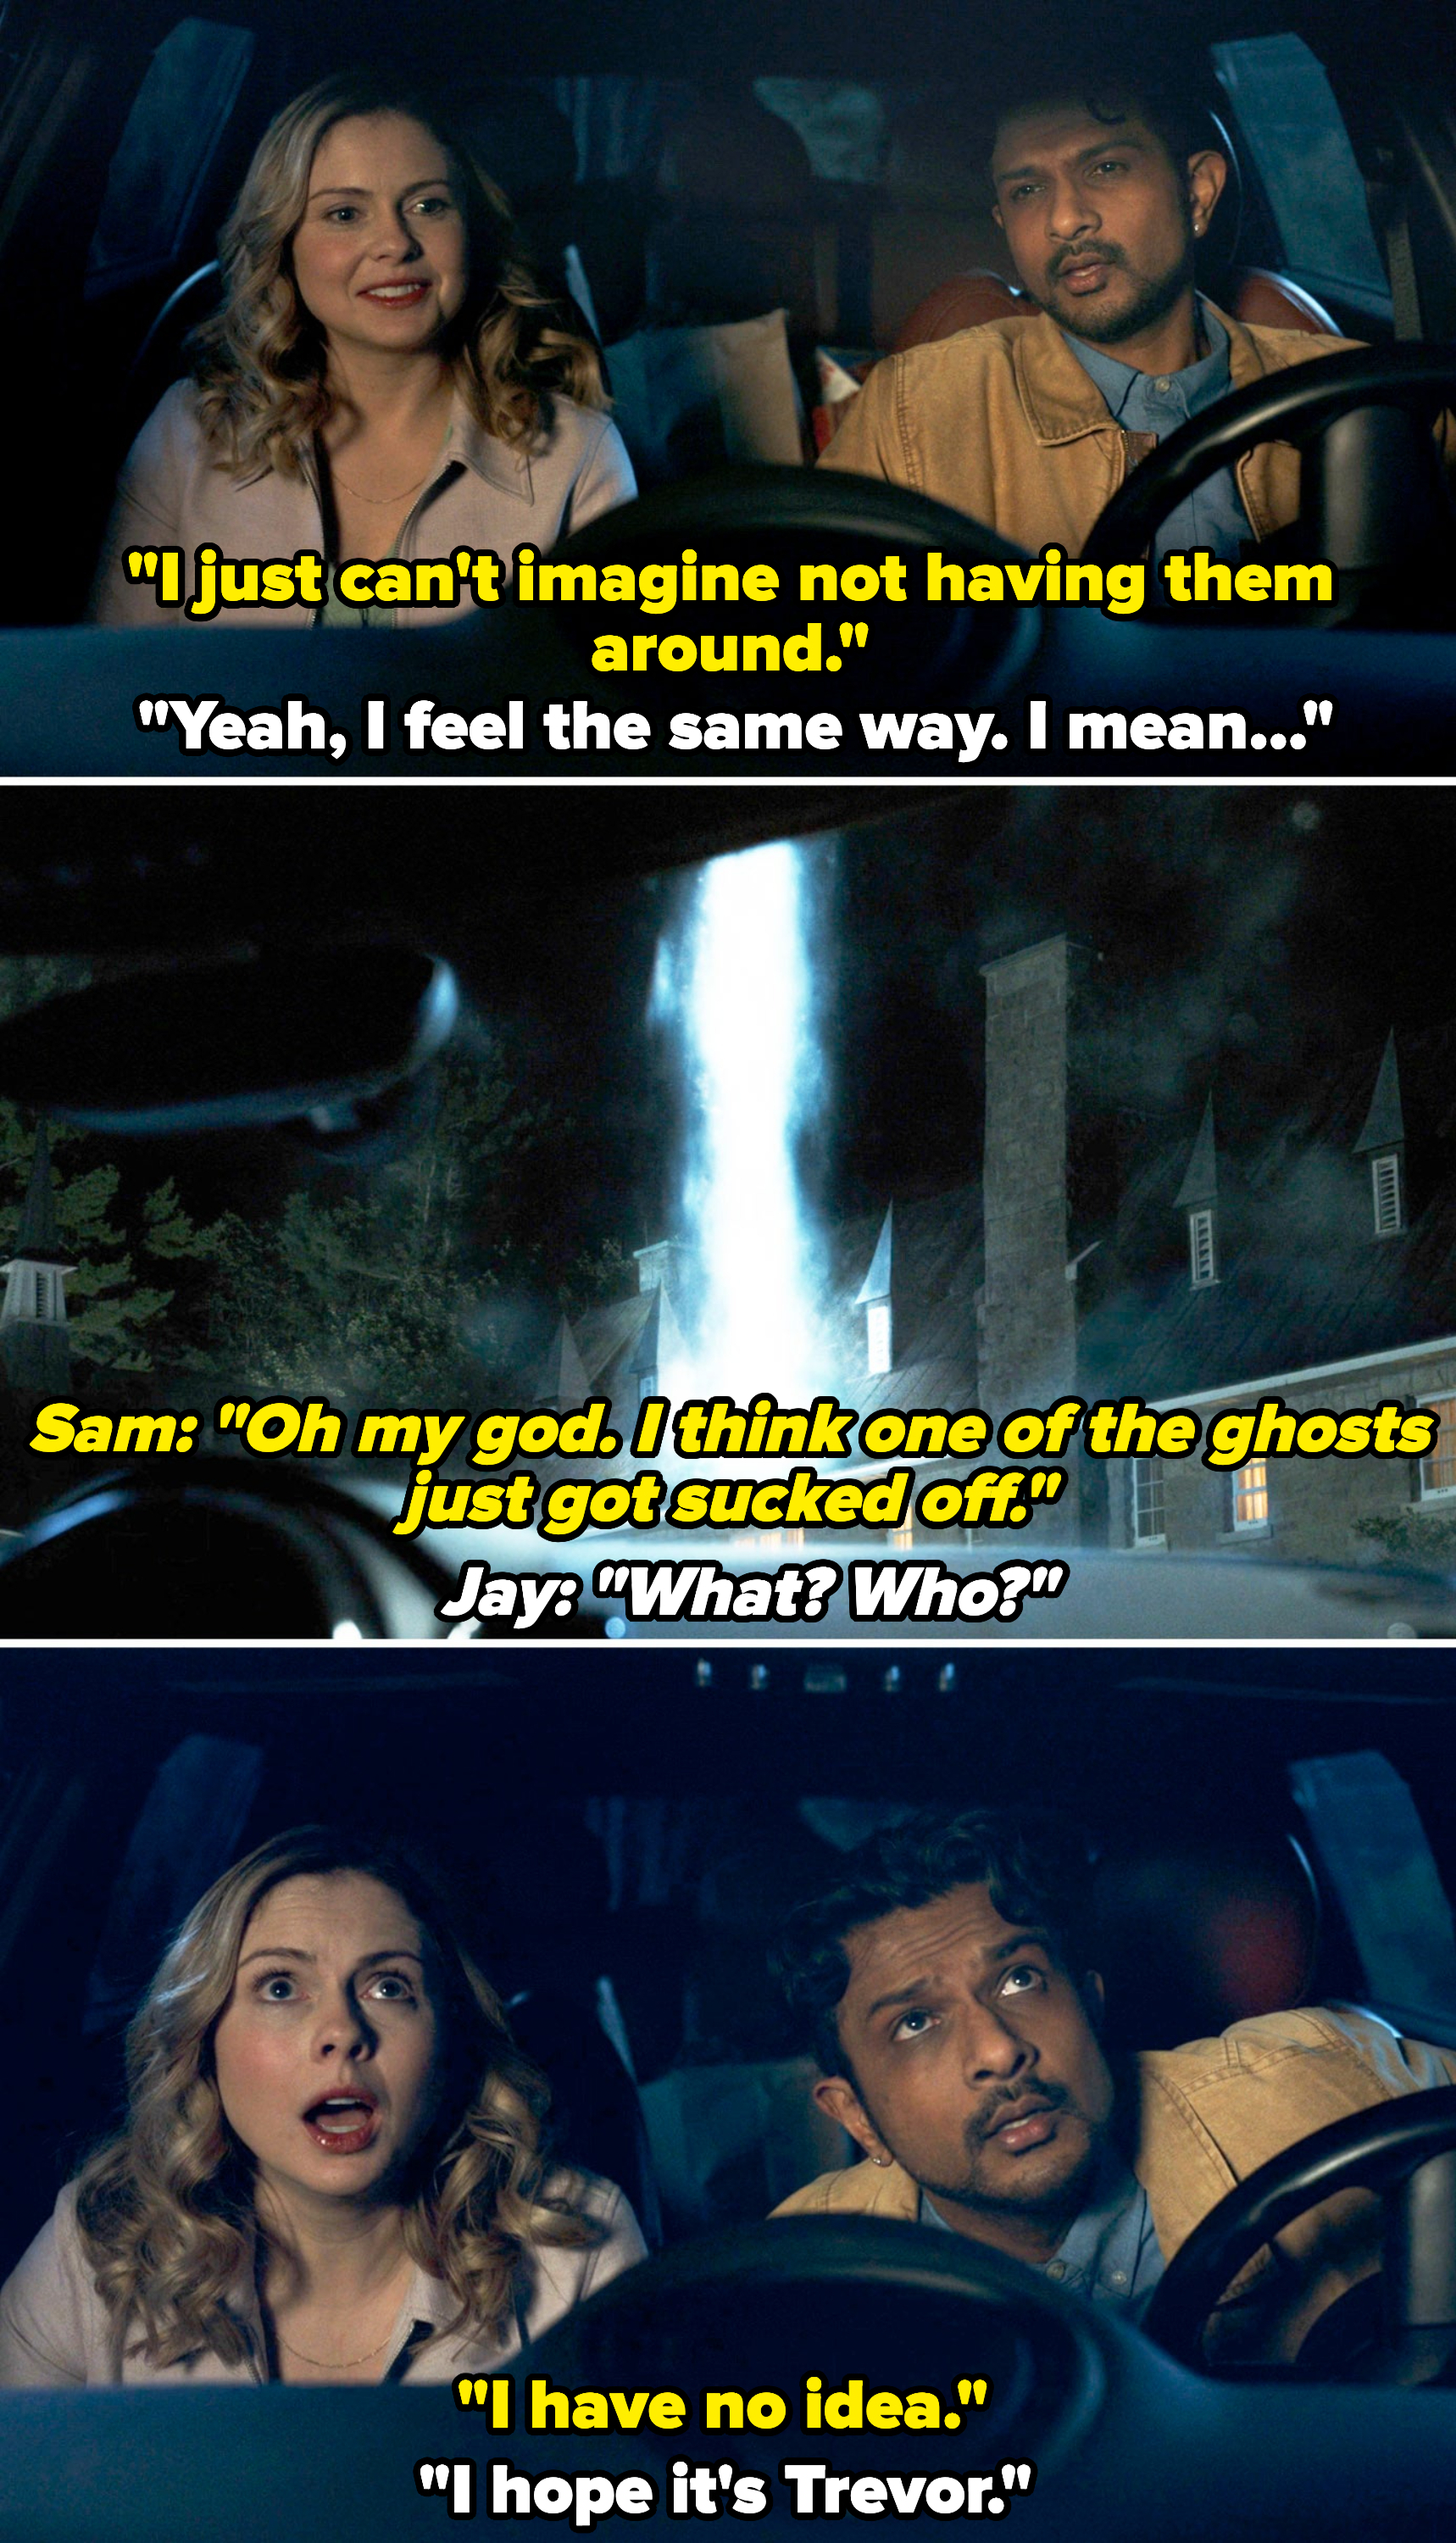 Samantha and Jay in the car, and Sam says, &quot;Oh my god, I think one of the ghosts just got sucked off&quot;; when Jay asks which one, Sam says she has no idea, and Jay says, &quot;I hope it&#x27;s Trevor&quot;